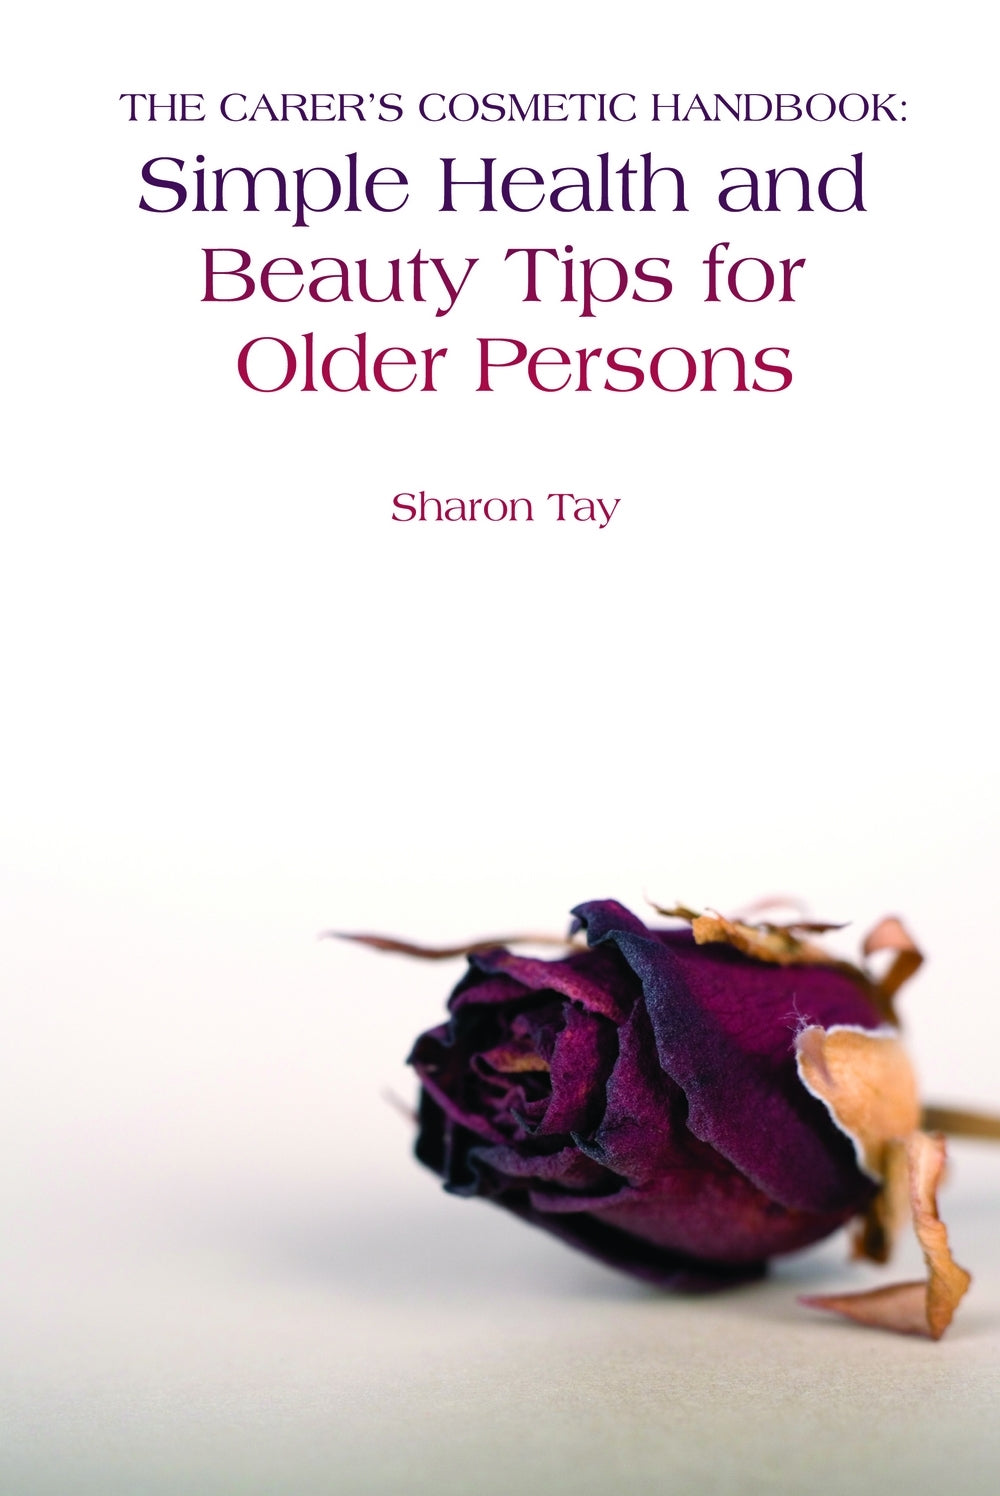 The Carer's Cosmetic Handbook by Sharon Tay